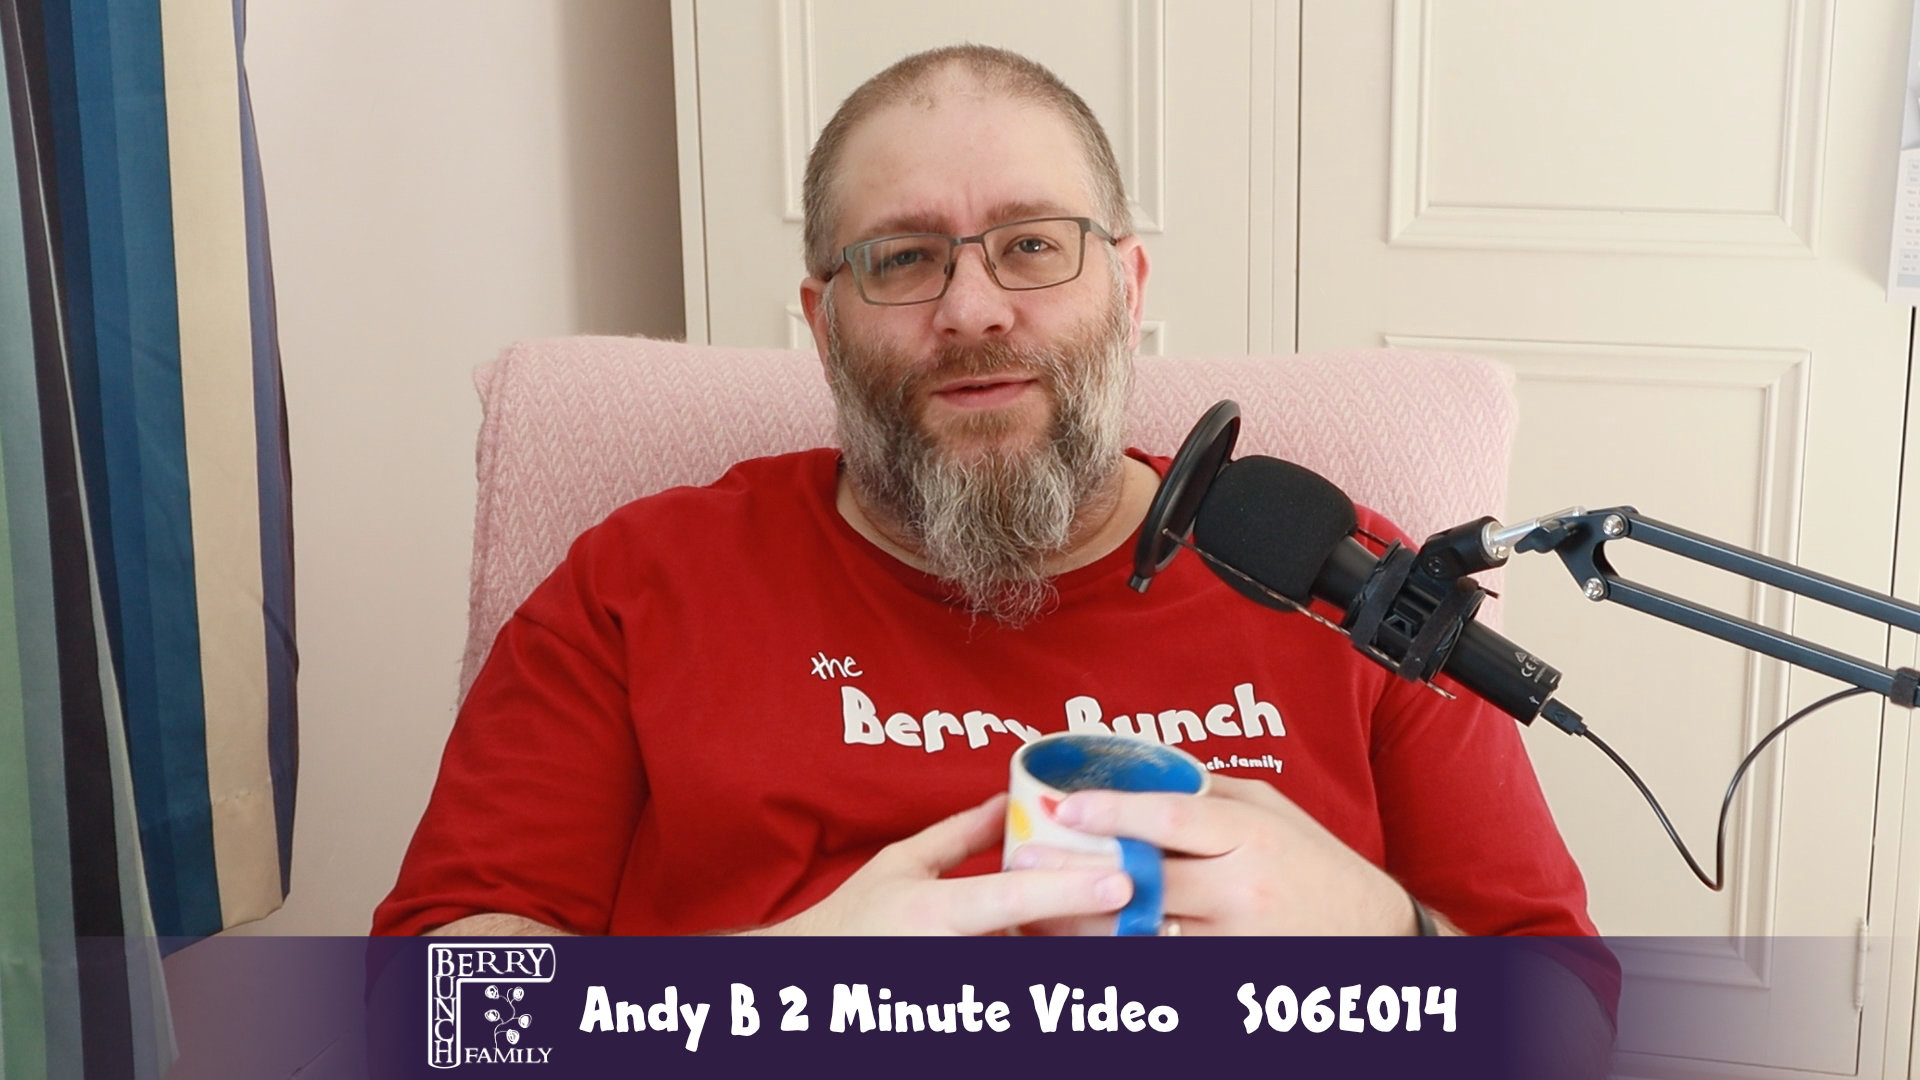 Andy B 2 Minute Video, S06E014 WP